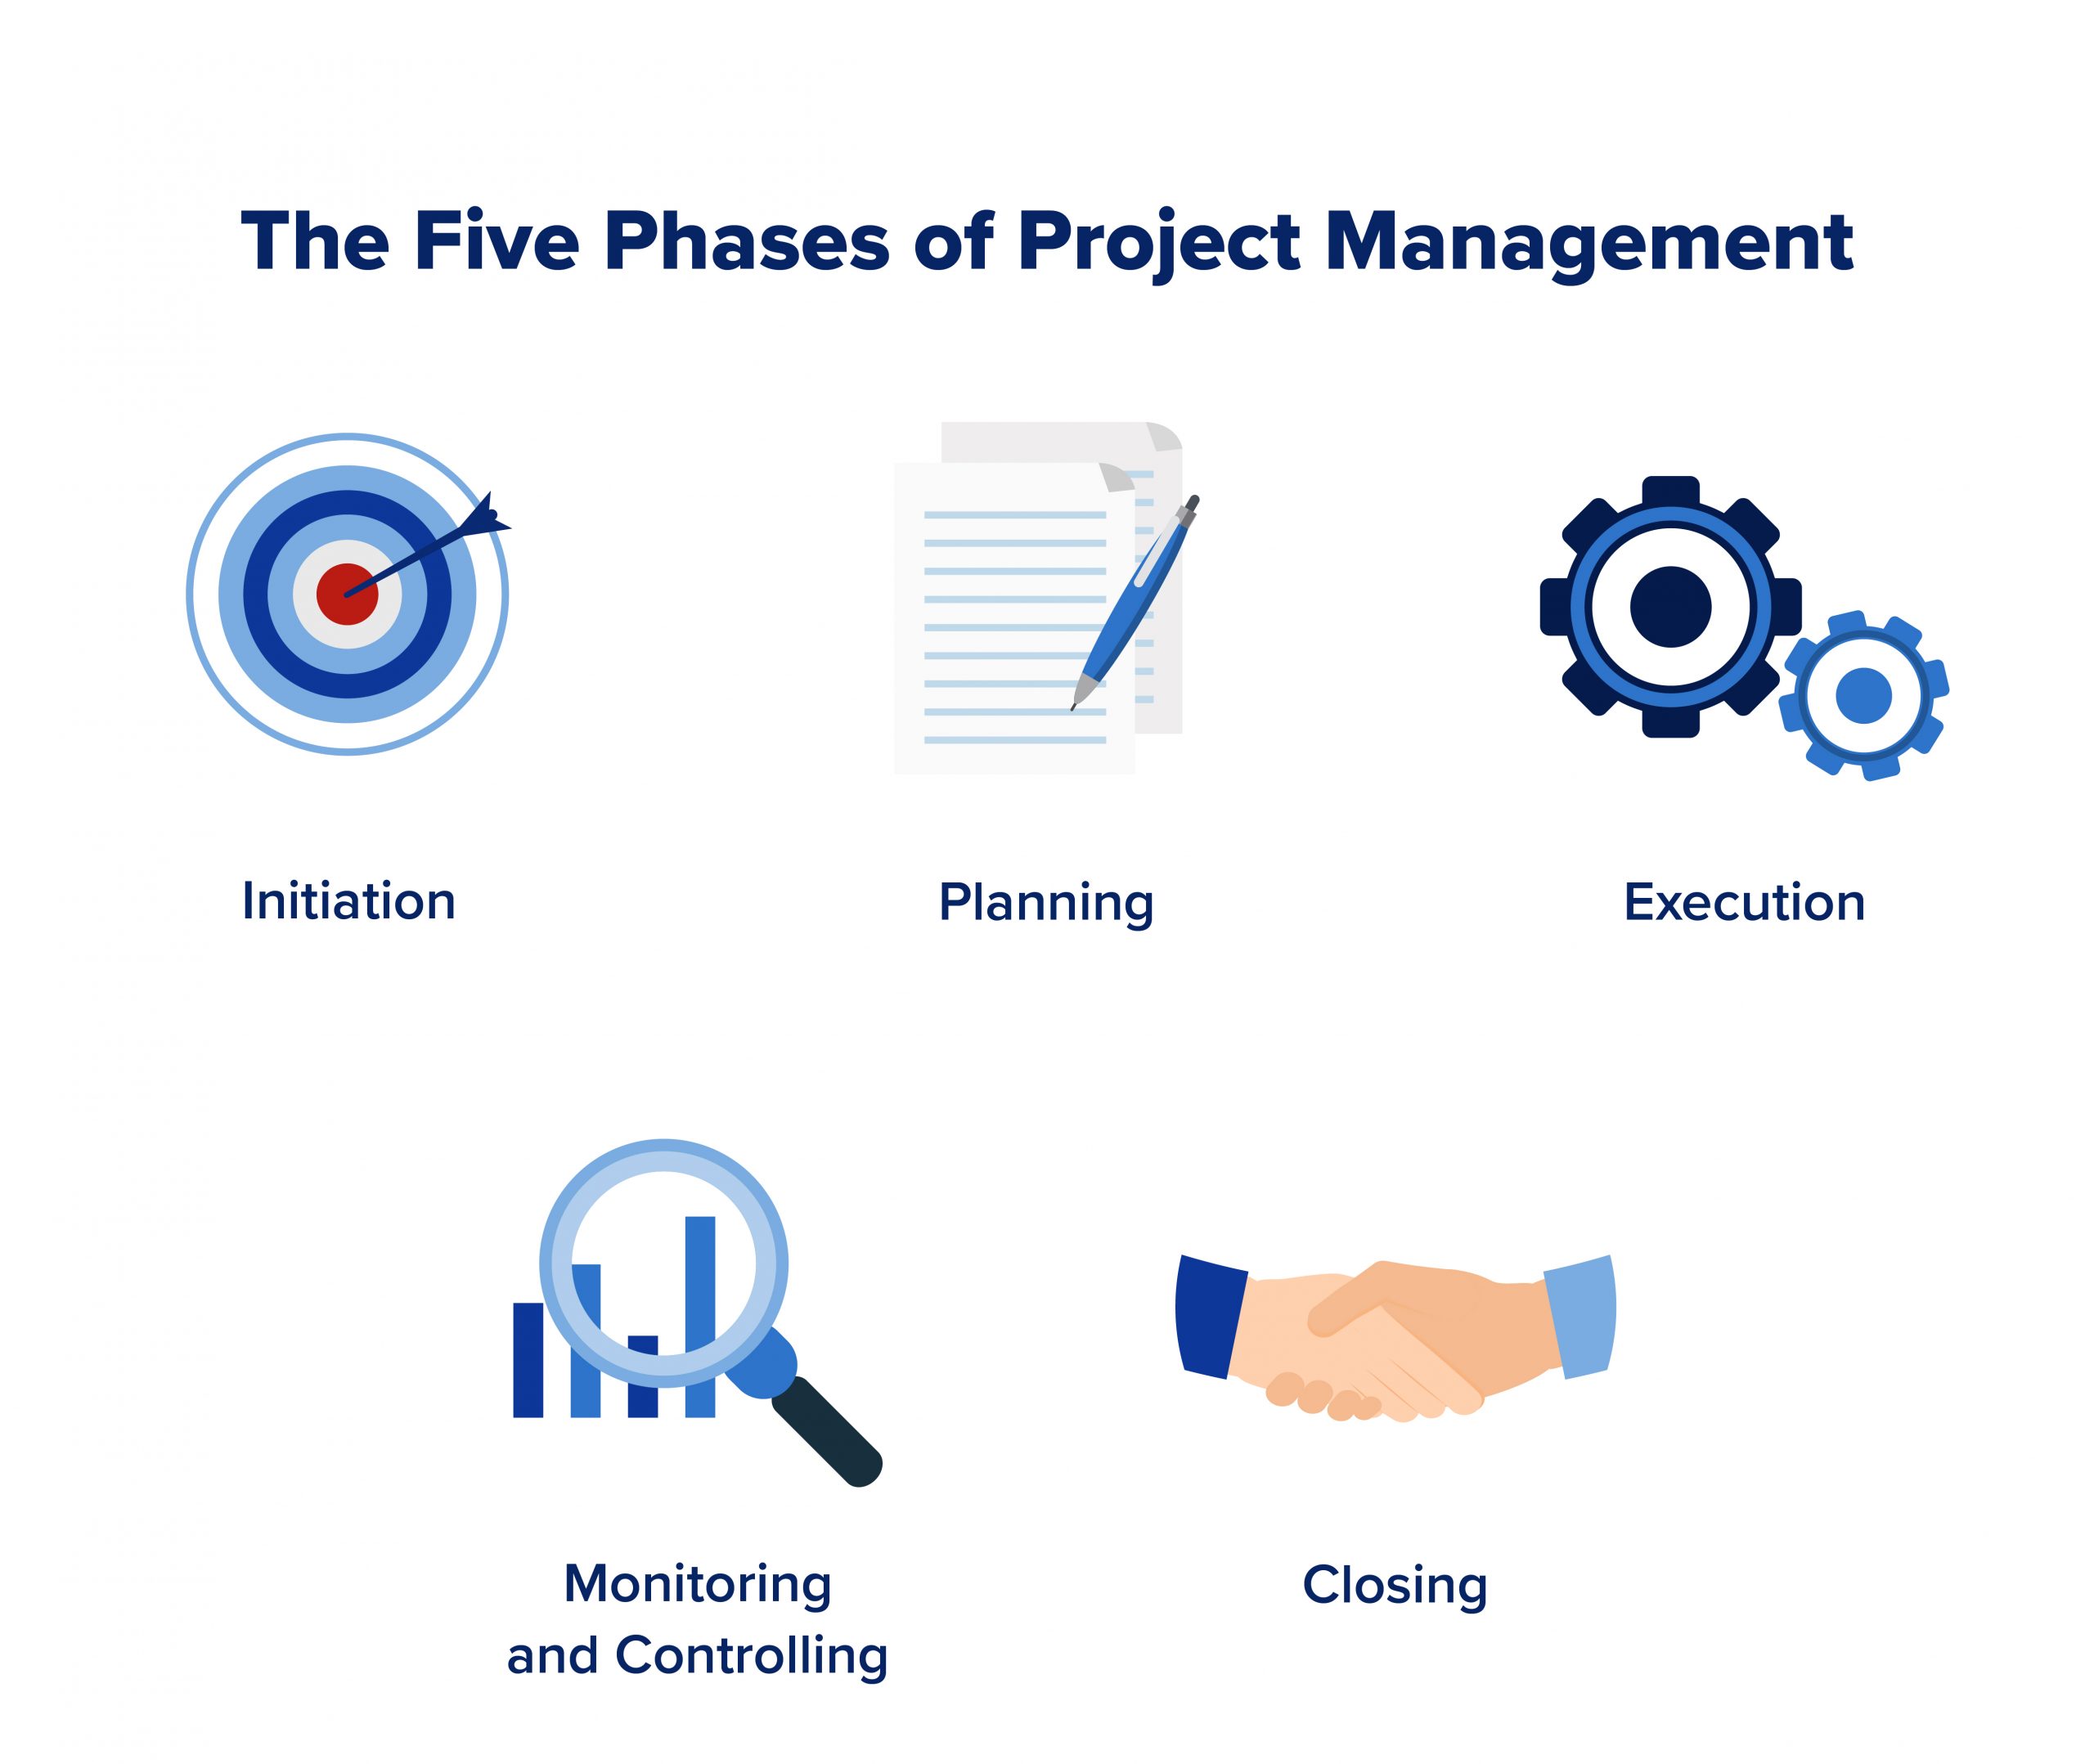  A graphic illustrating the five phases of project management.